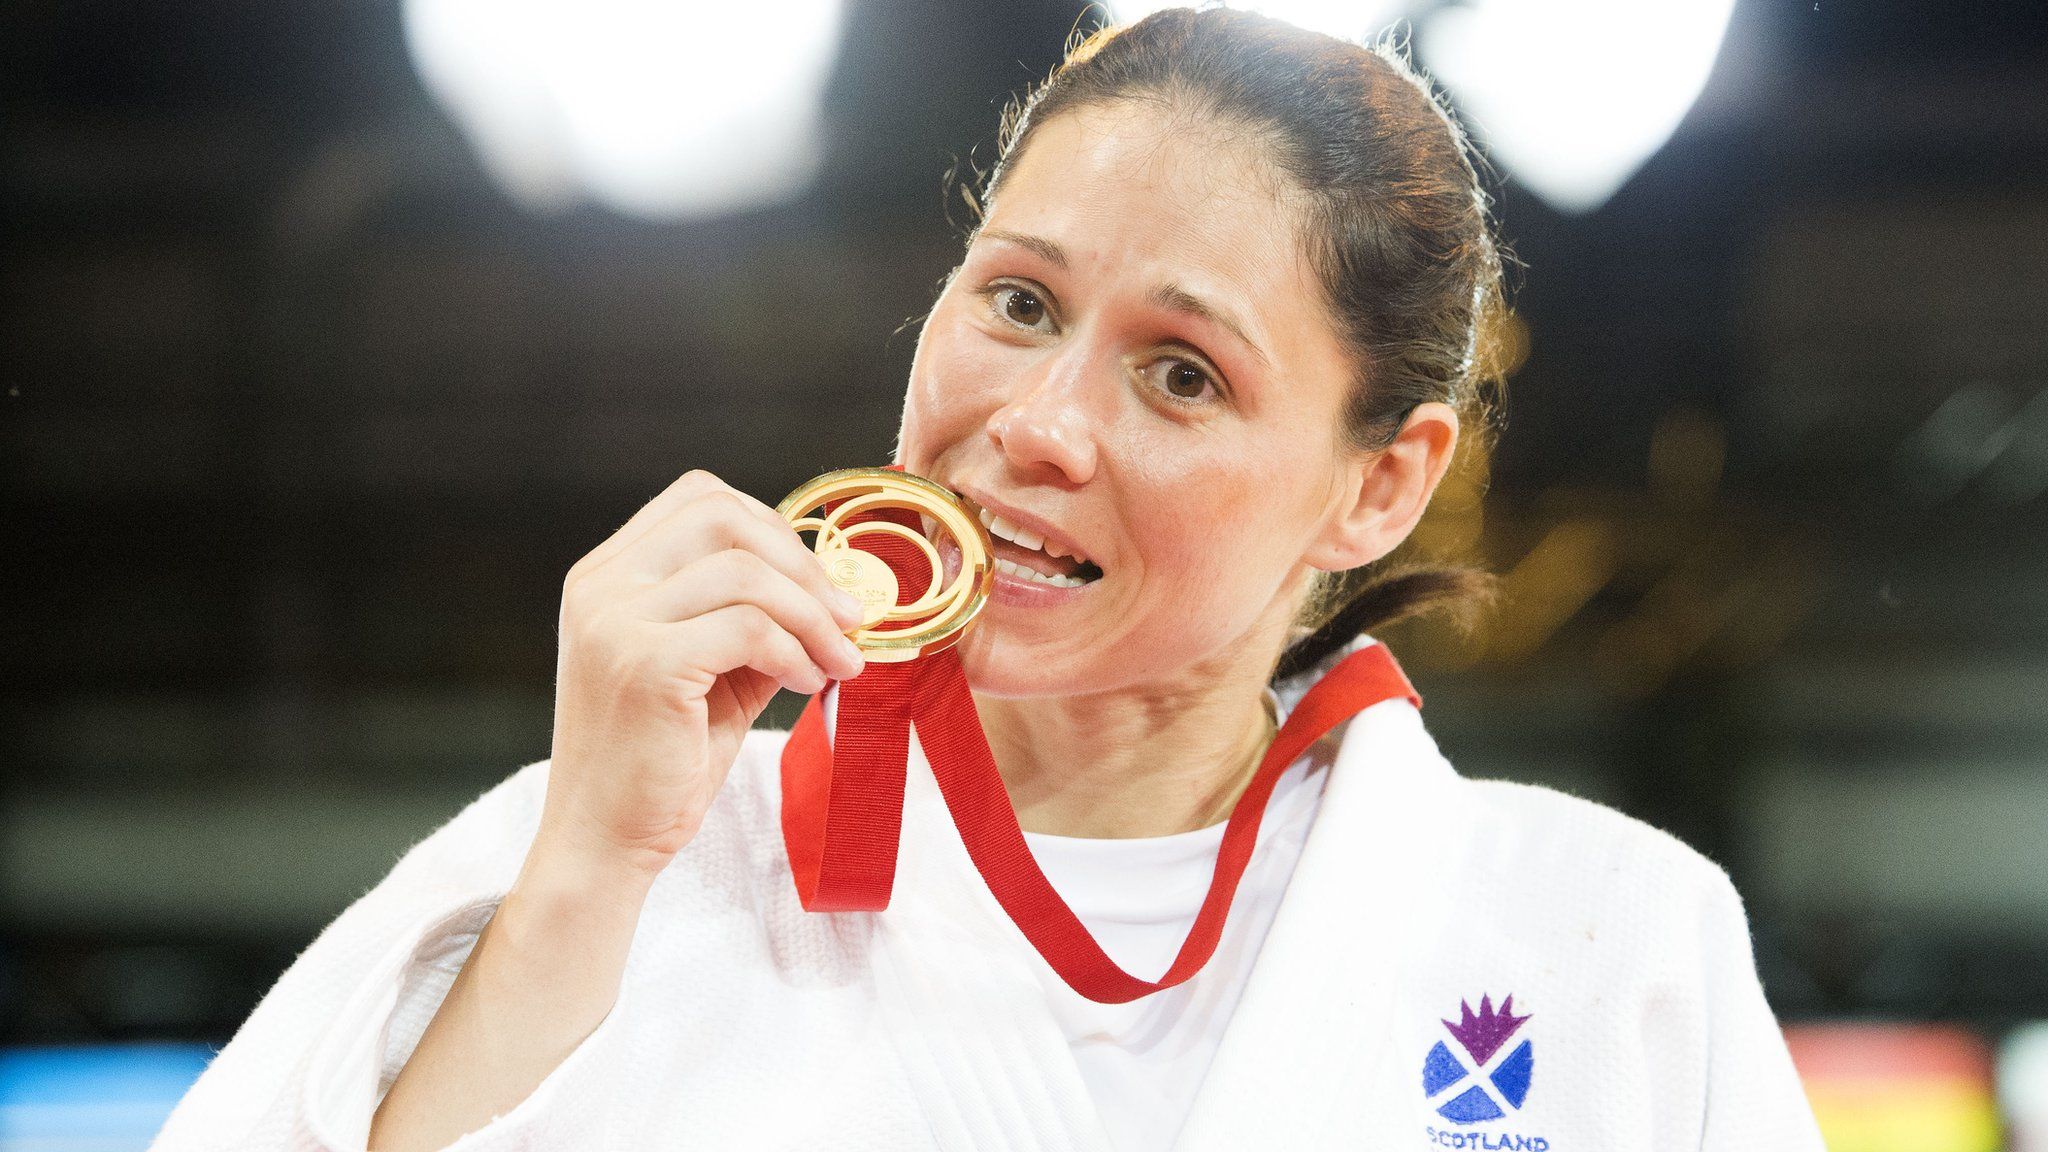 Judoka Louise Renicks with her gold medal during the Glasgow 2014 Commonwealth Games